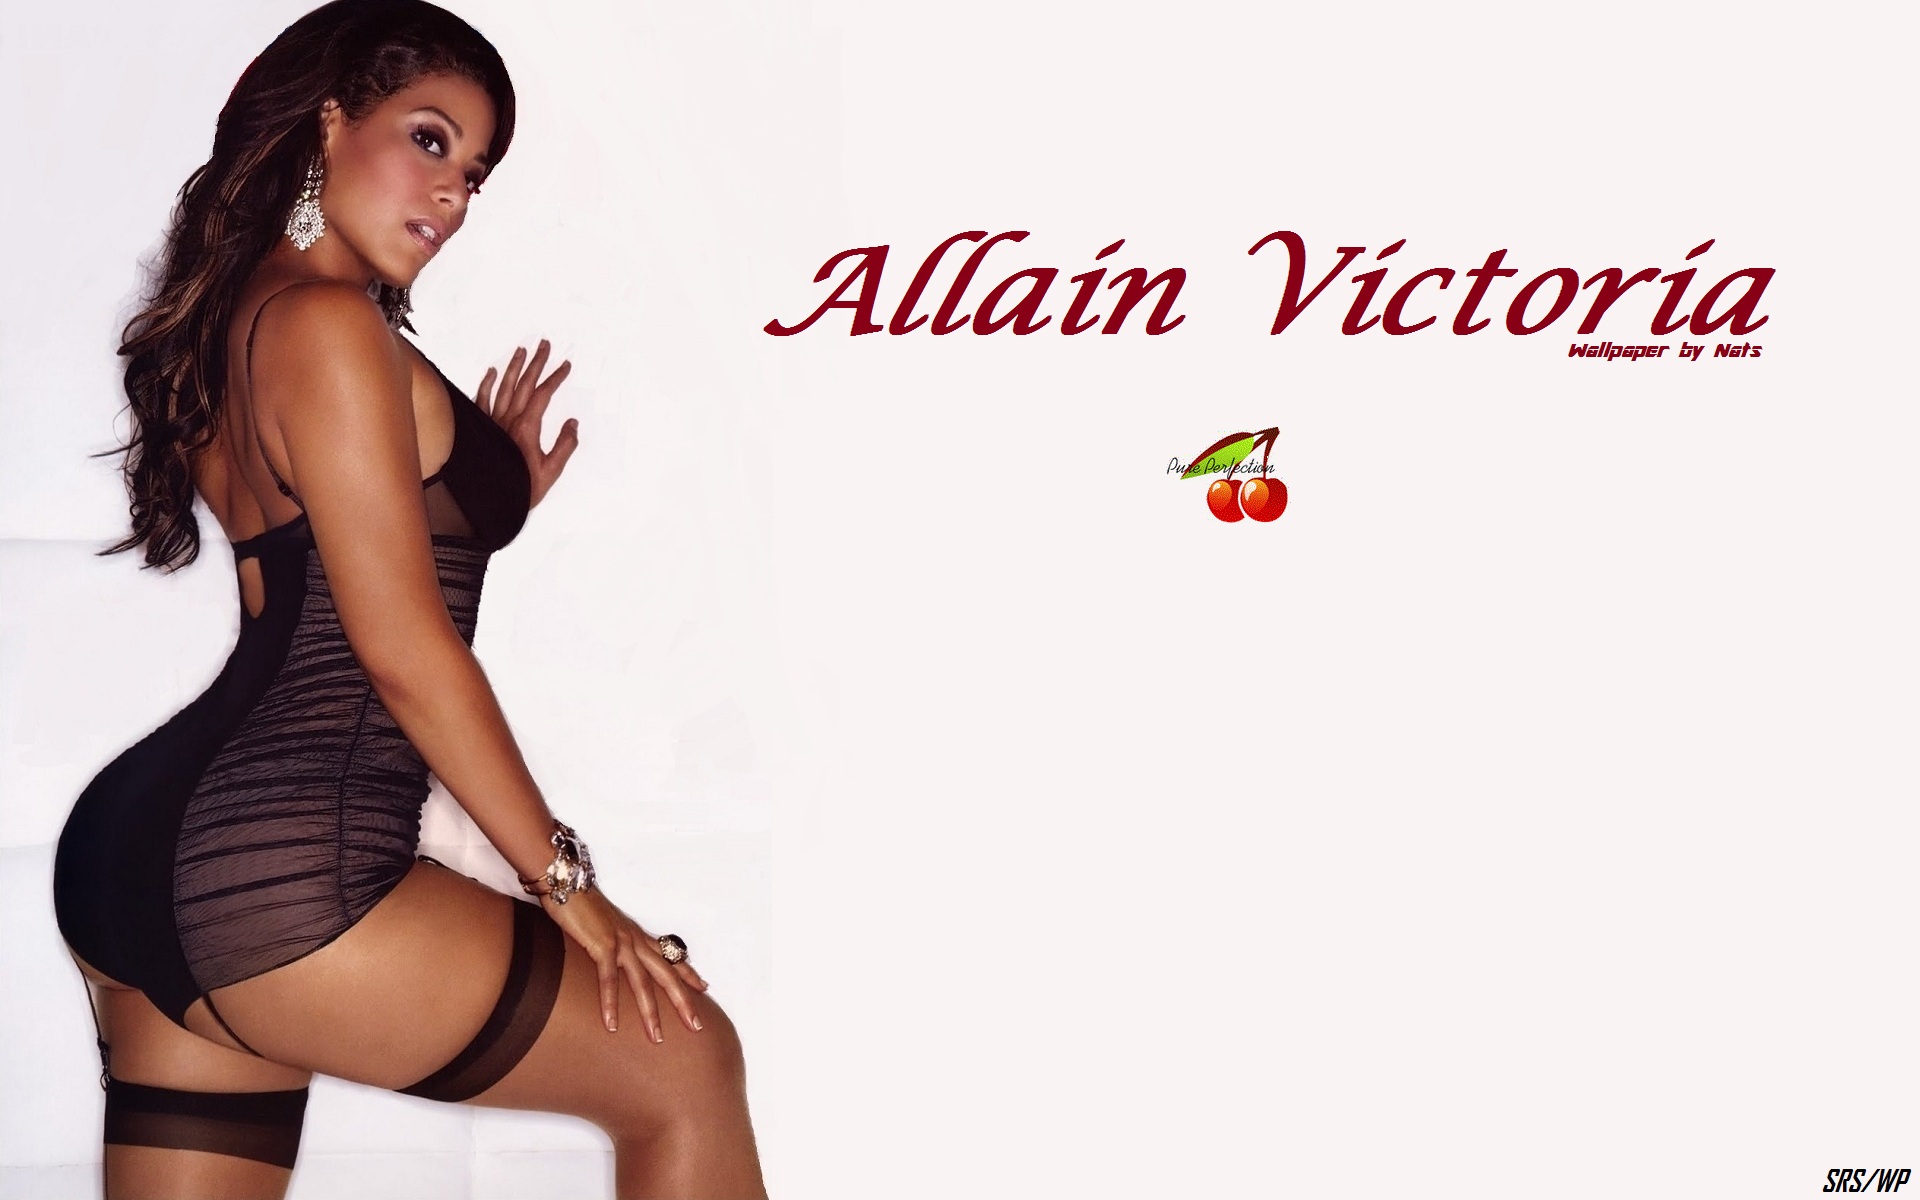 Download High quality Allain Victoria wallpaper / Celebrities Female / 1920x1200